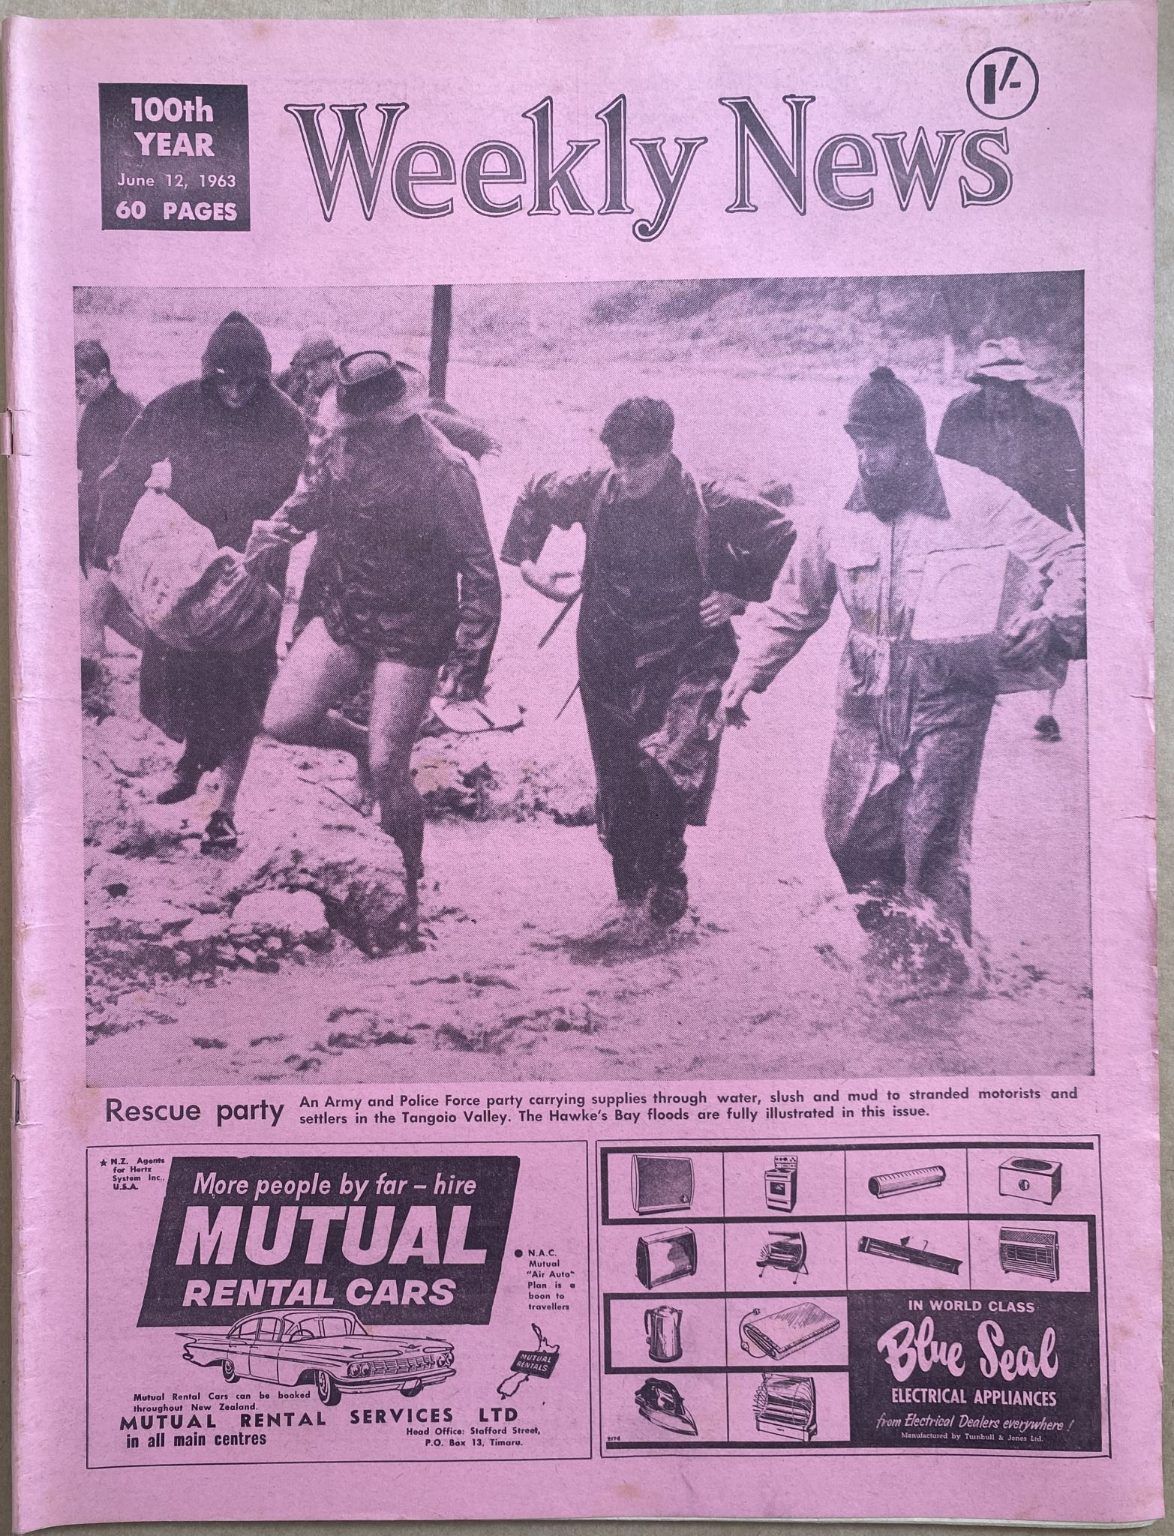 OLD NEWSPAPER: The Weekly News, No. 5194, 12 June 1963